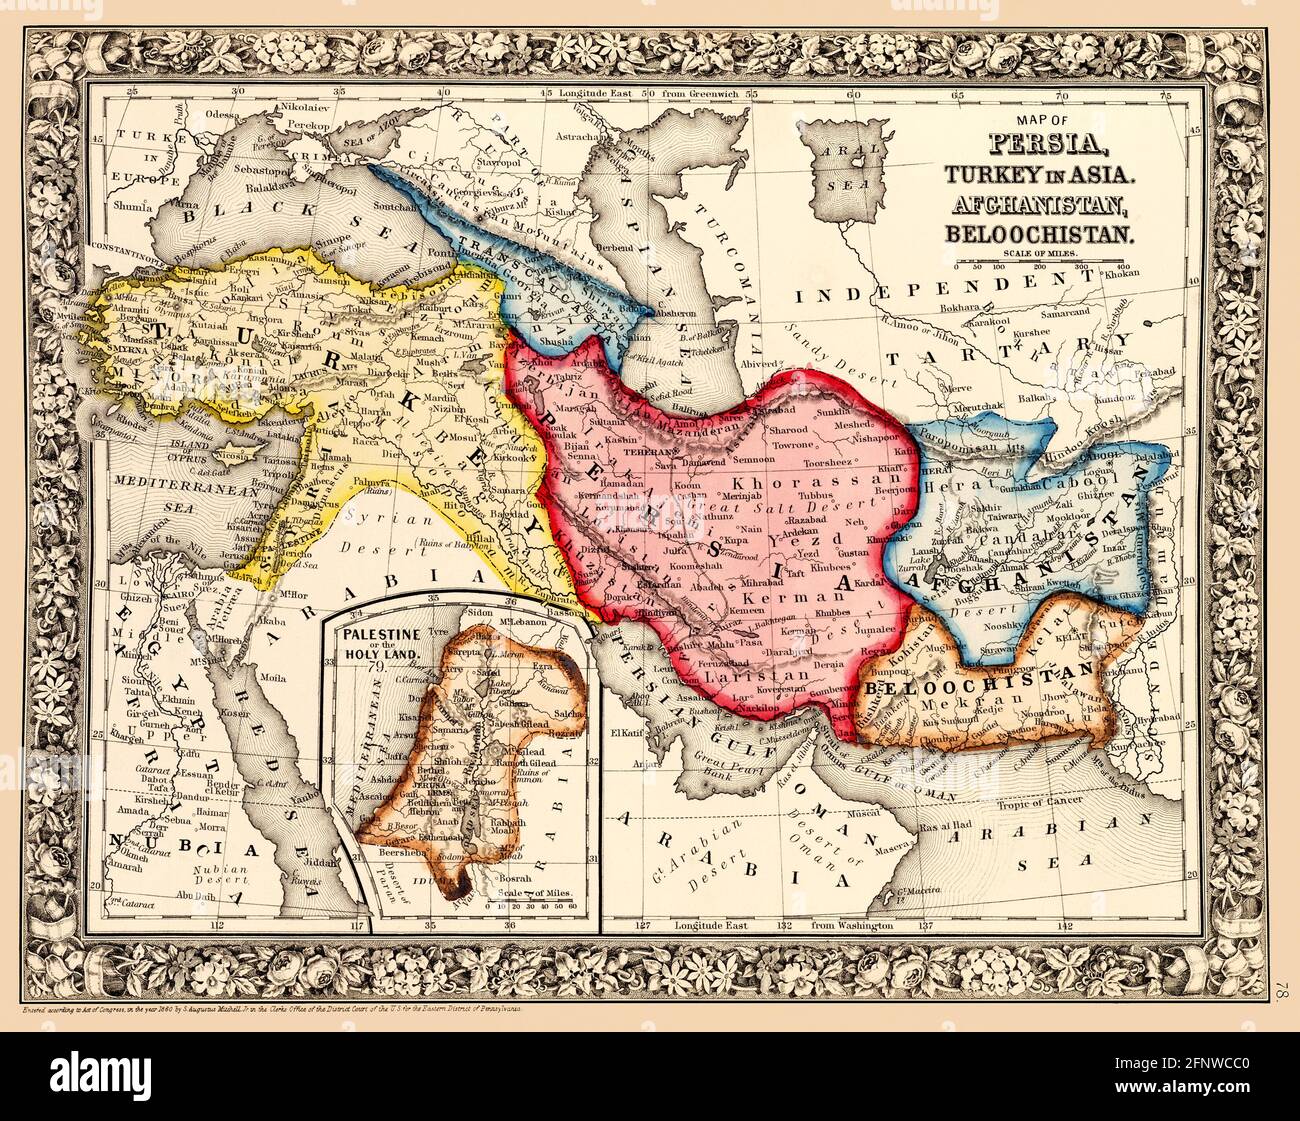 Original title: Map of Persia, Turkey in Asia, Afghanistan, Beloochistan ; Palestine, or the Holy Land [inset]. Map shows political borders and important landmarks. This is a beautifully detailed historic, enhanced reproduction of a 1863 map. It is framed by a floral border. Insert map shows the 'Holy Land.' Stock Photo